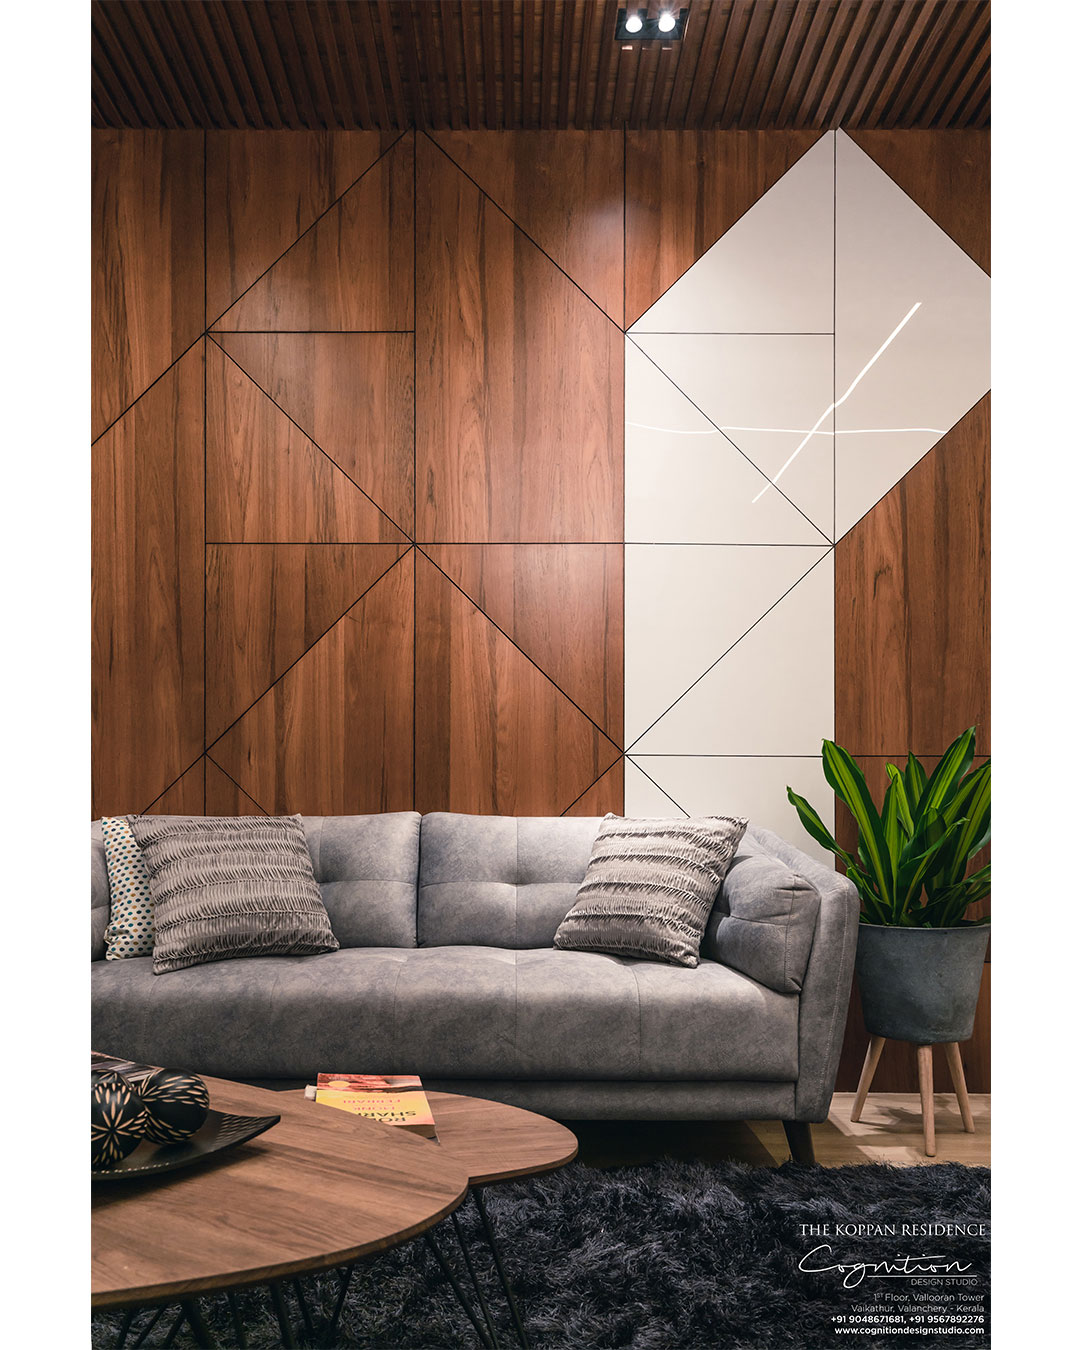 The Formal Living - The wall panel is made up of wood and white acrylic sheets.